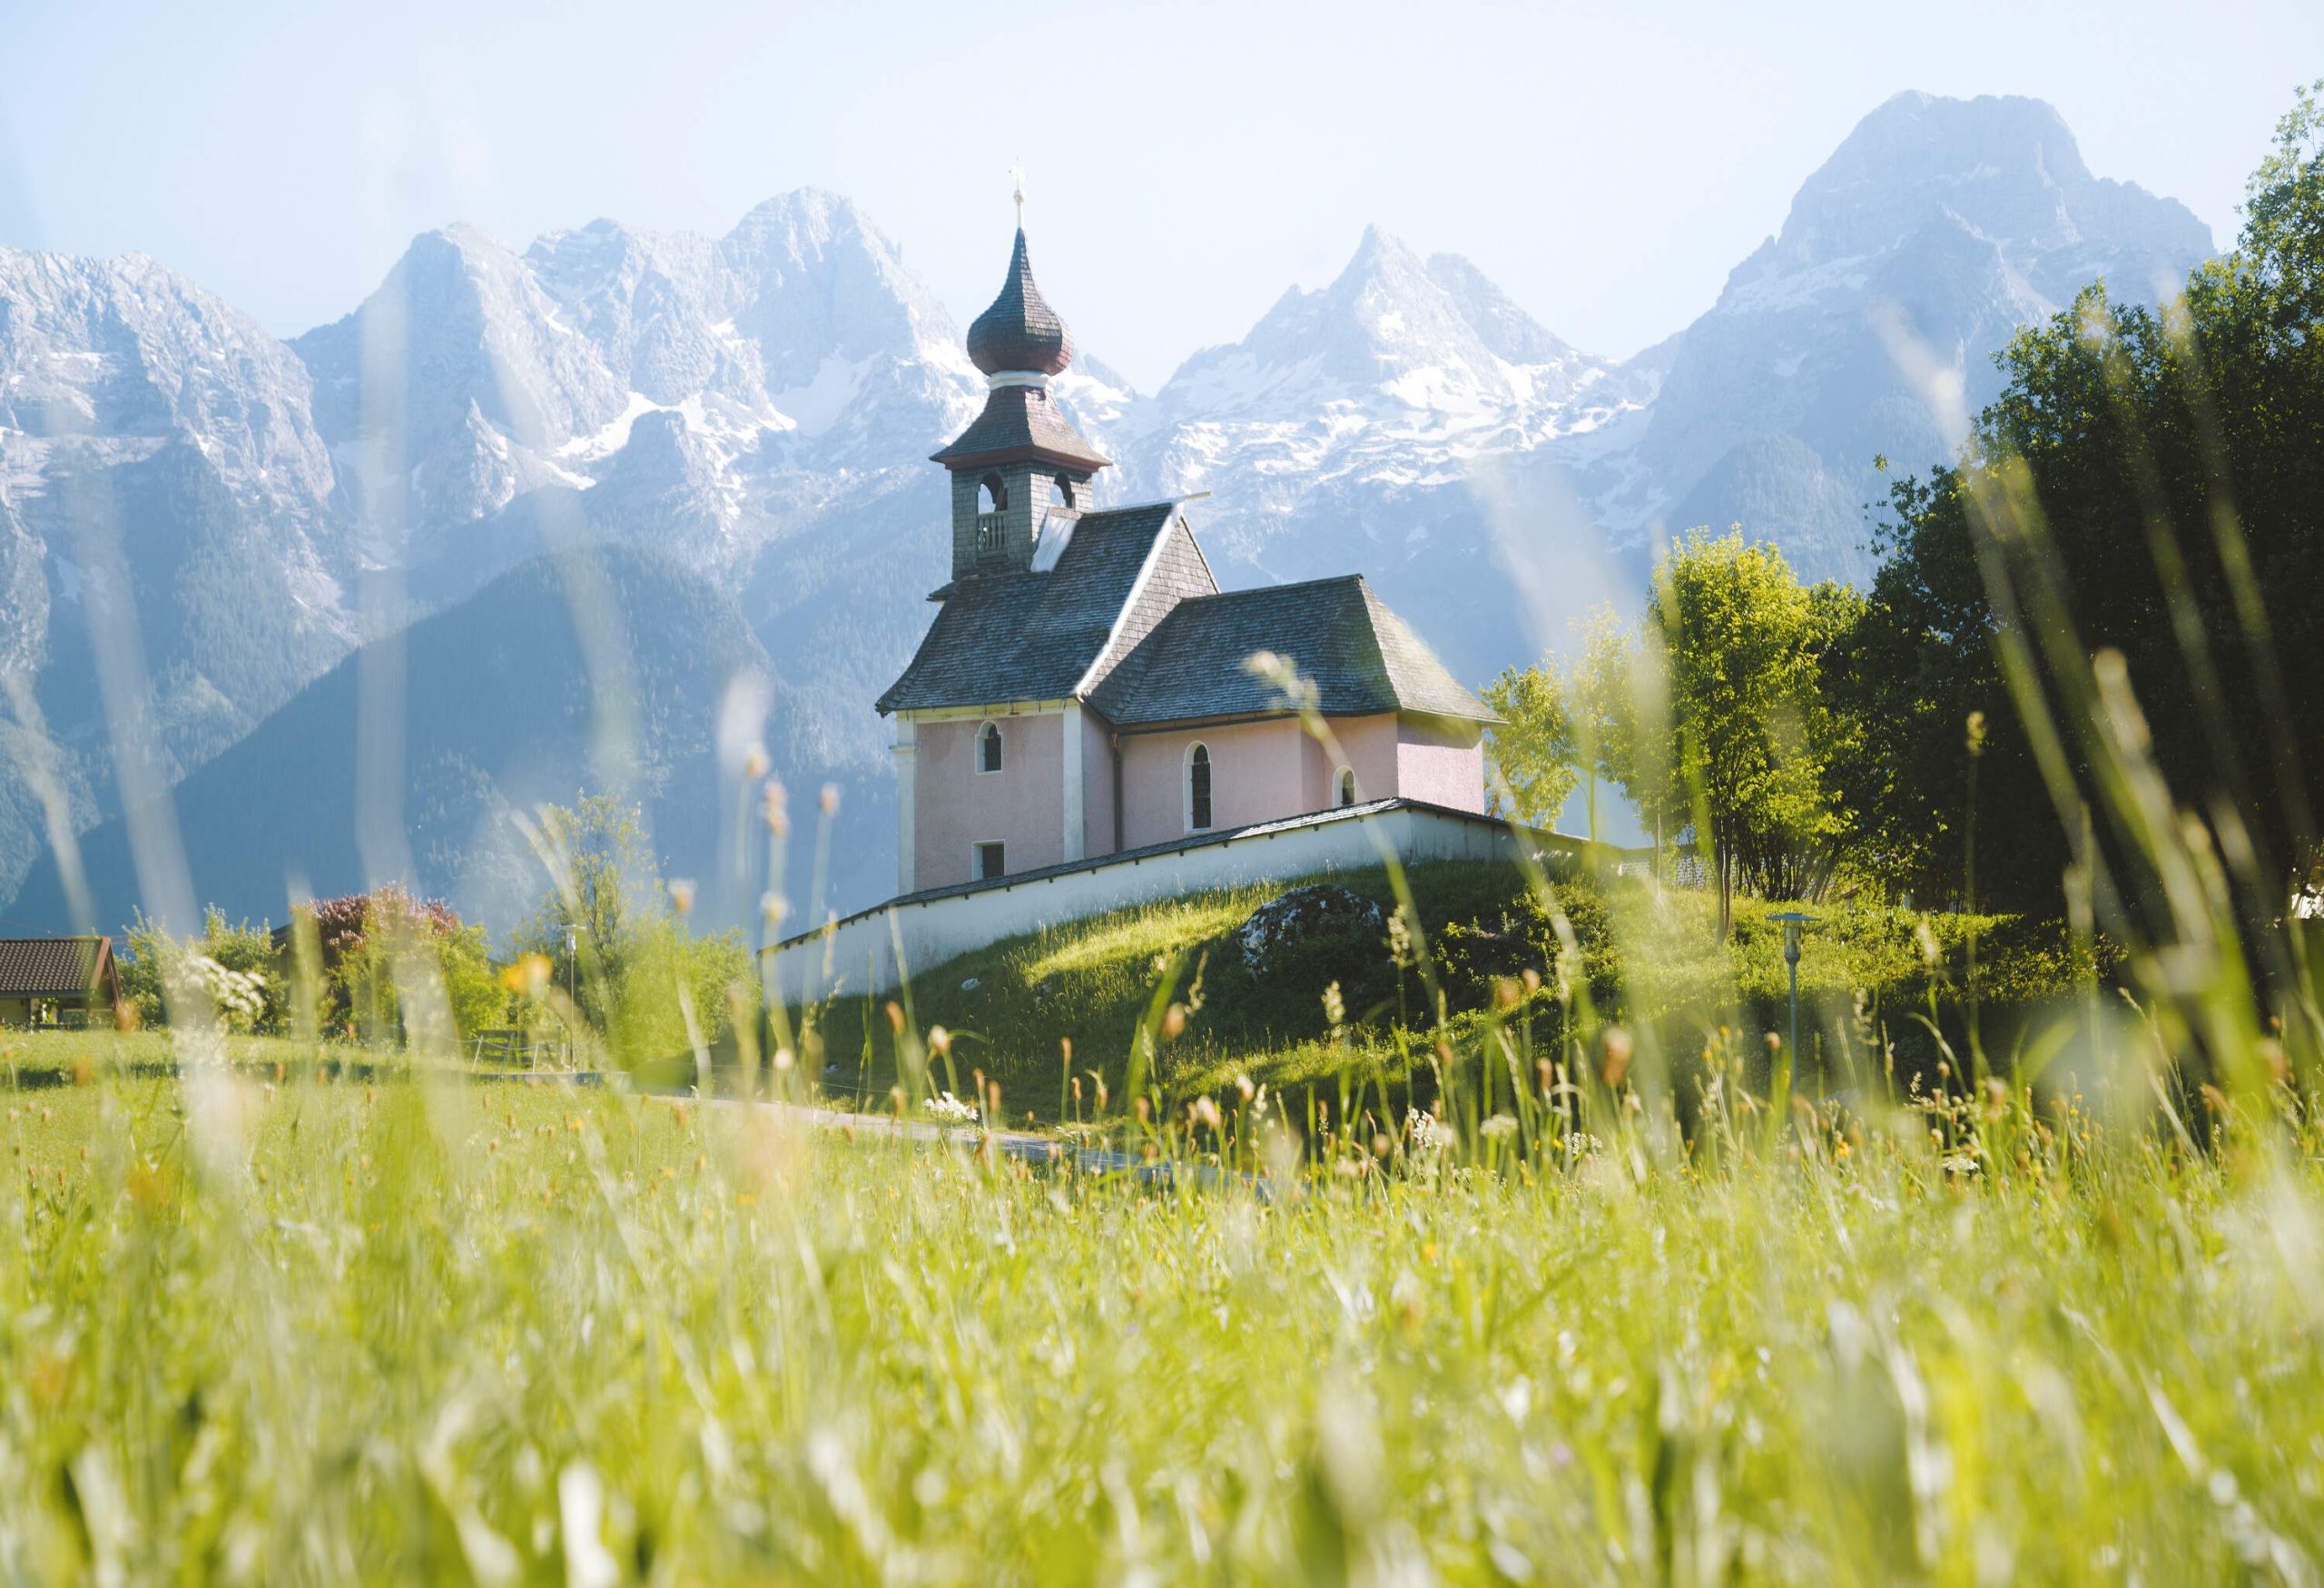 A small and classic chapel on a lush meadow against the rocky mountain range in the background.